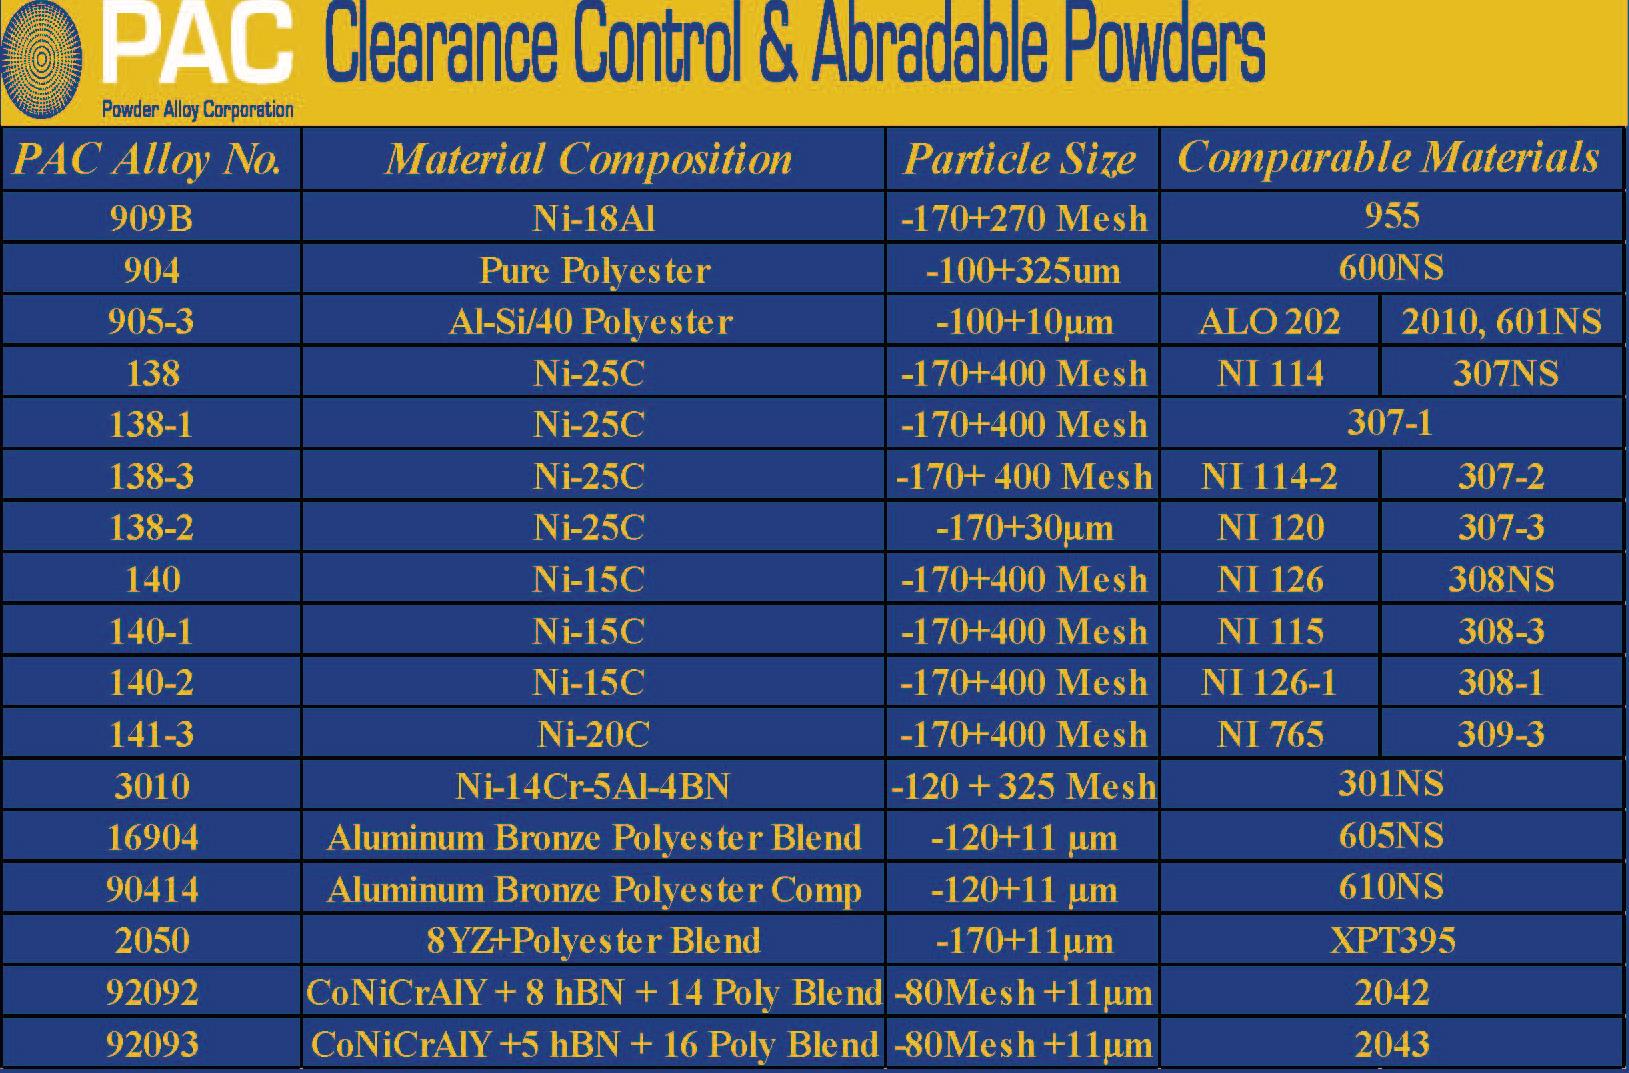 Clearance Control & Abradable Powders